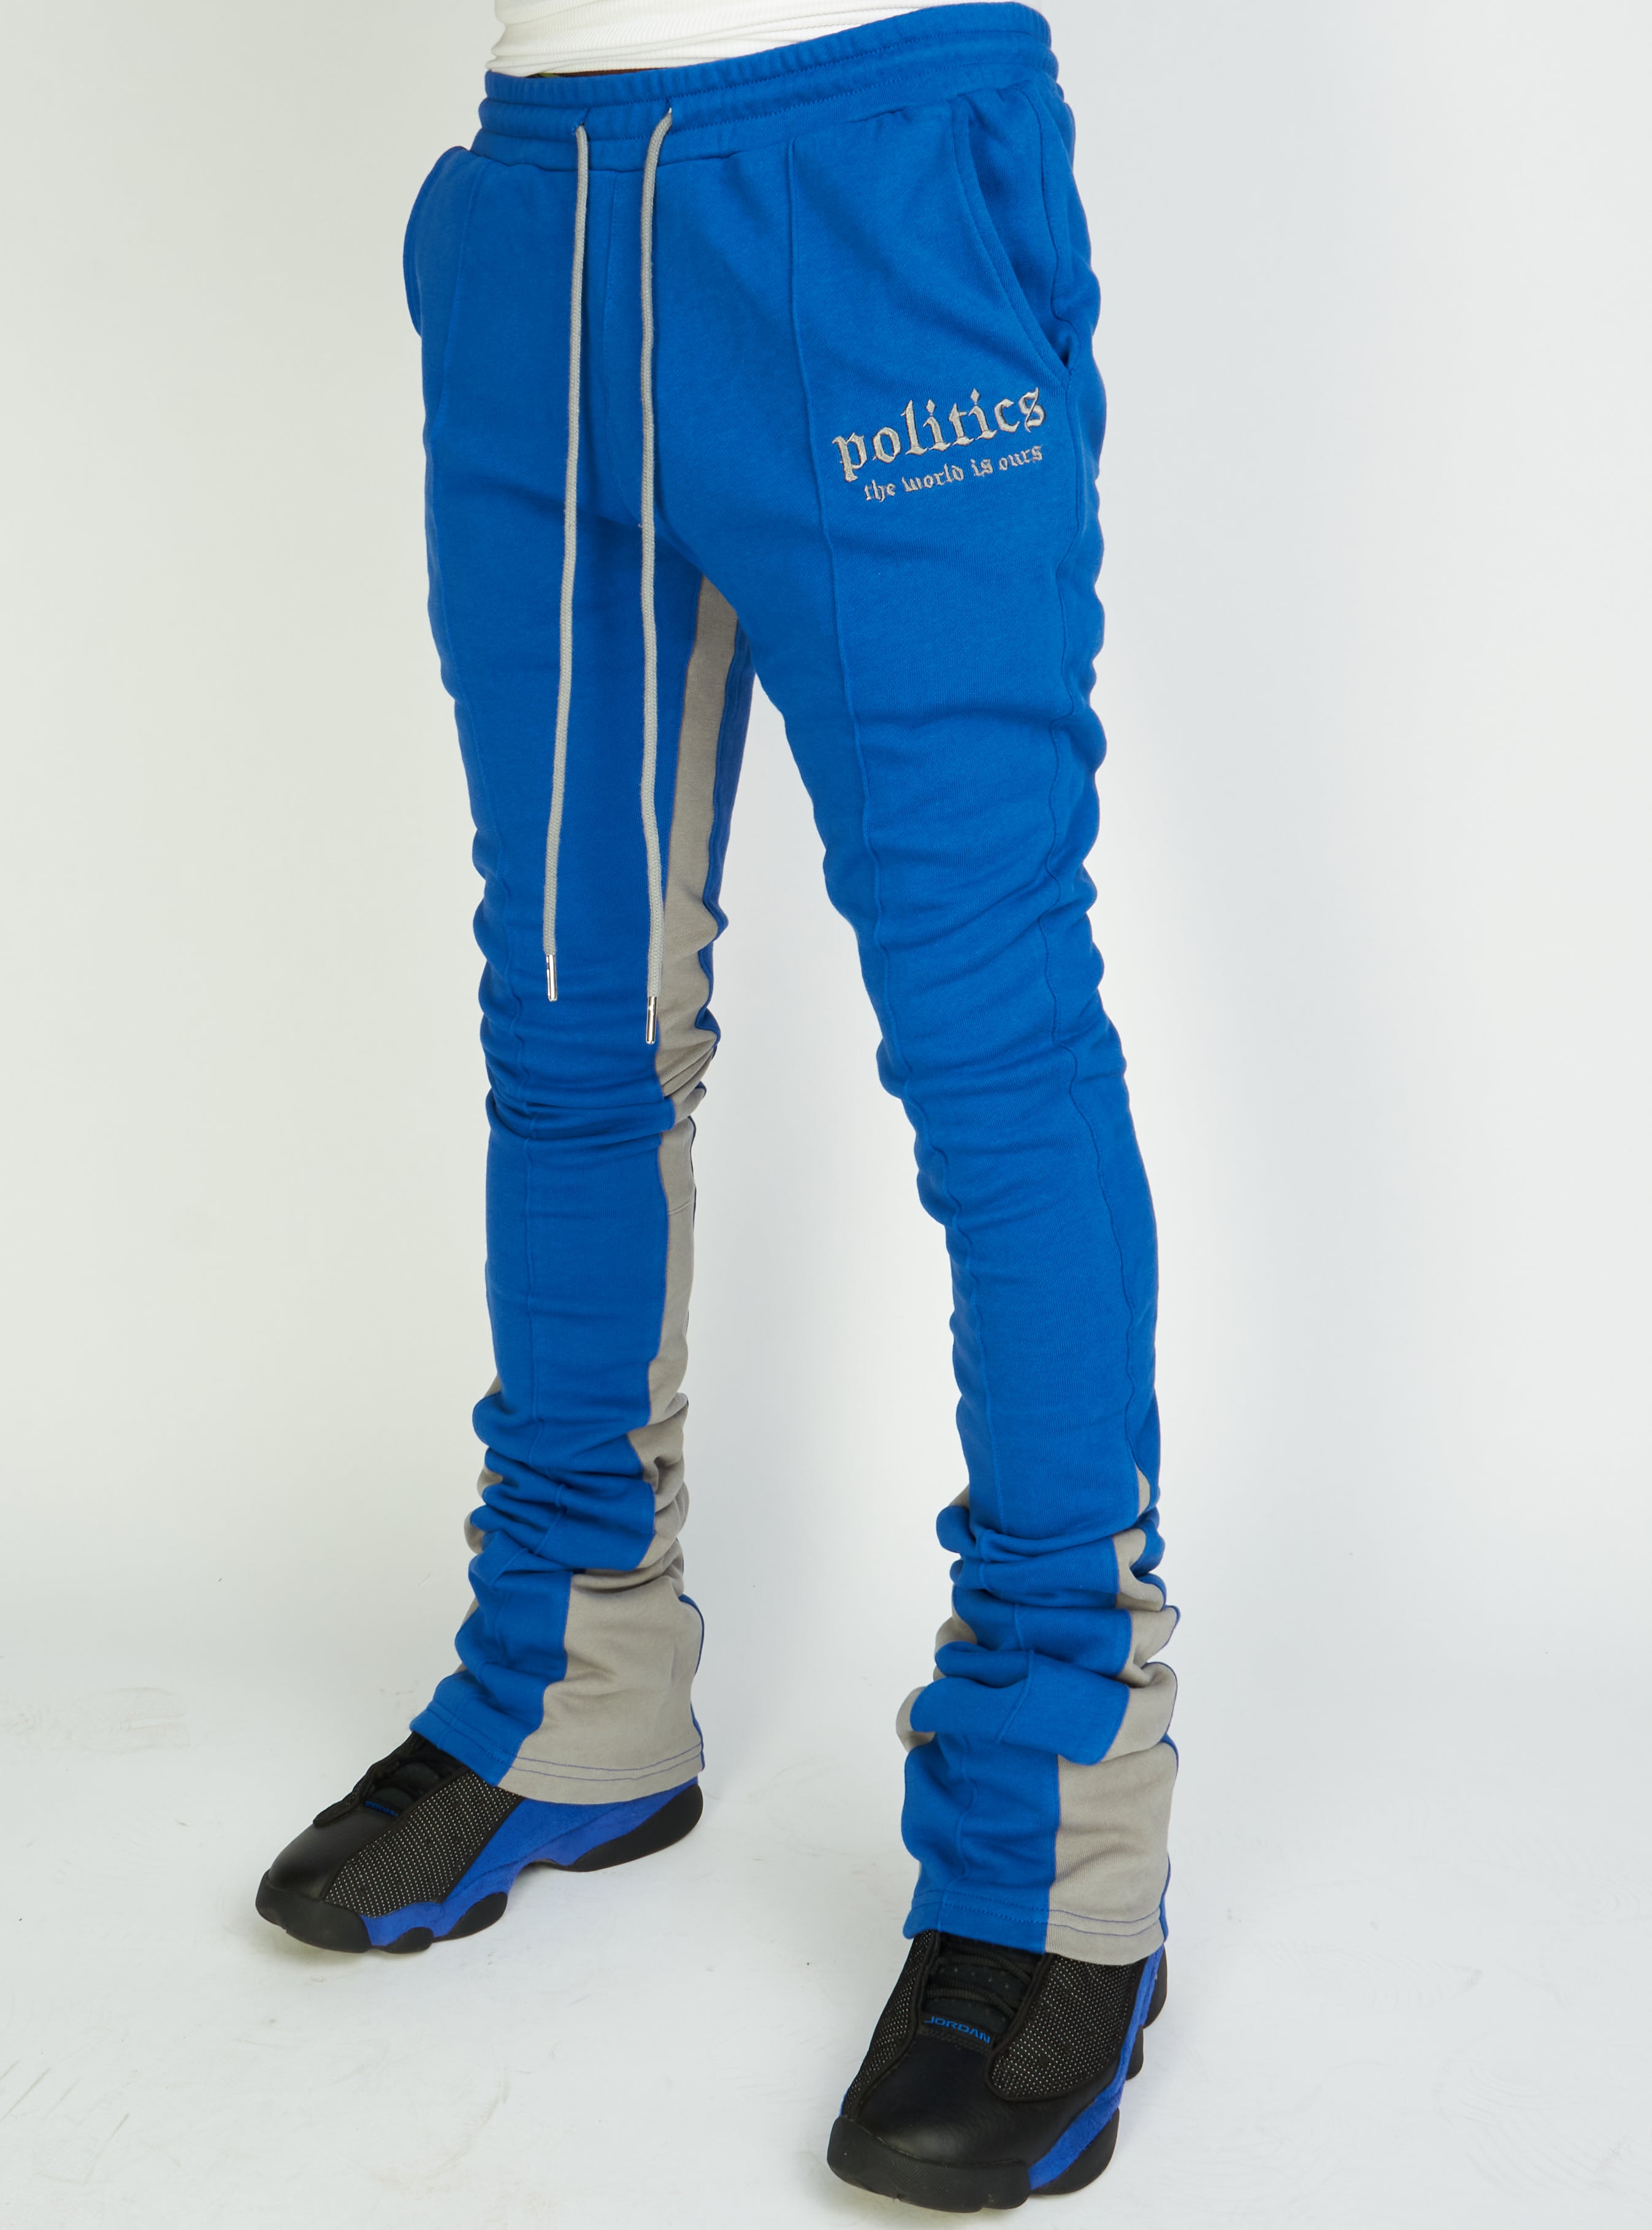 Politics Super Stacked Sweatpants - Red And White - Foster701